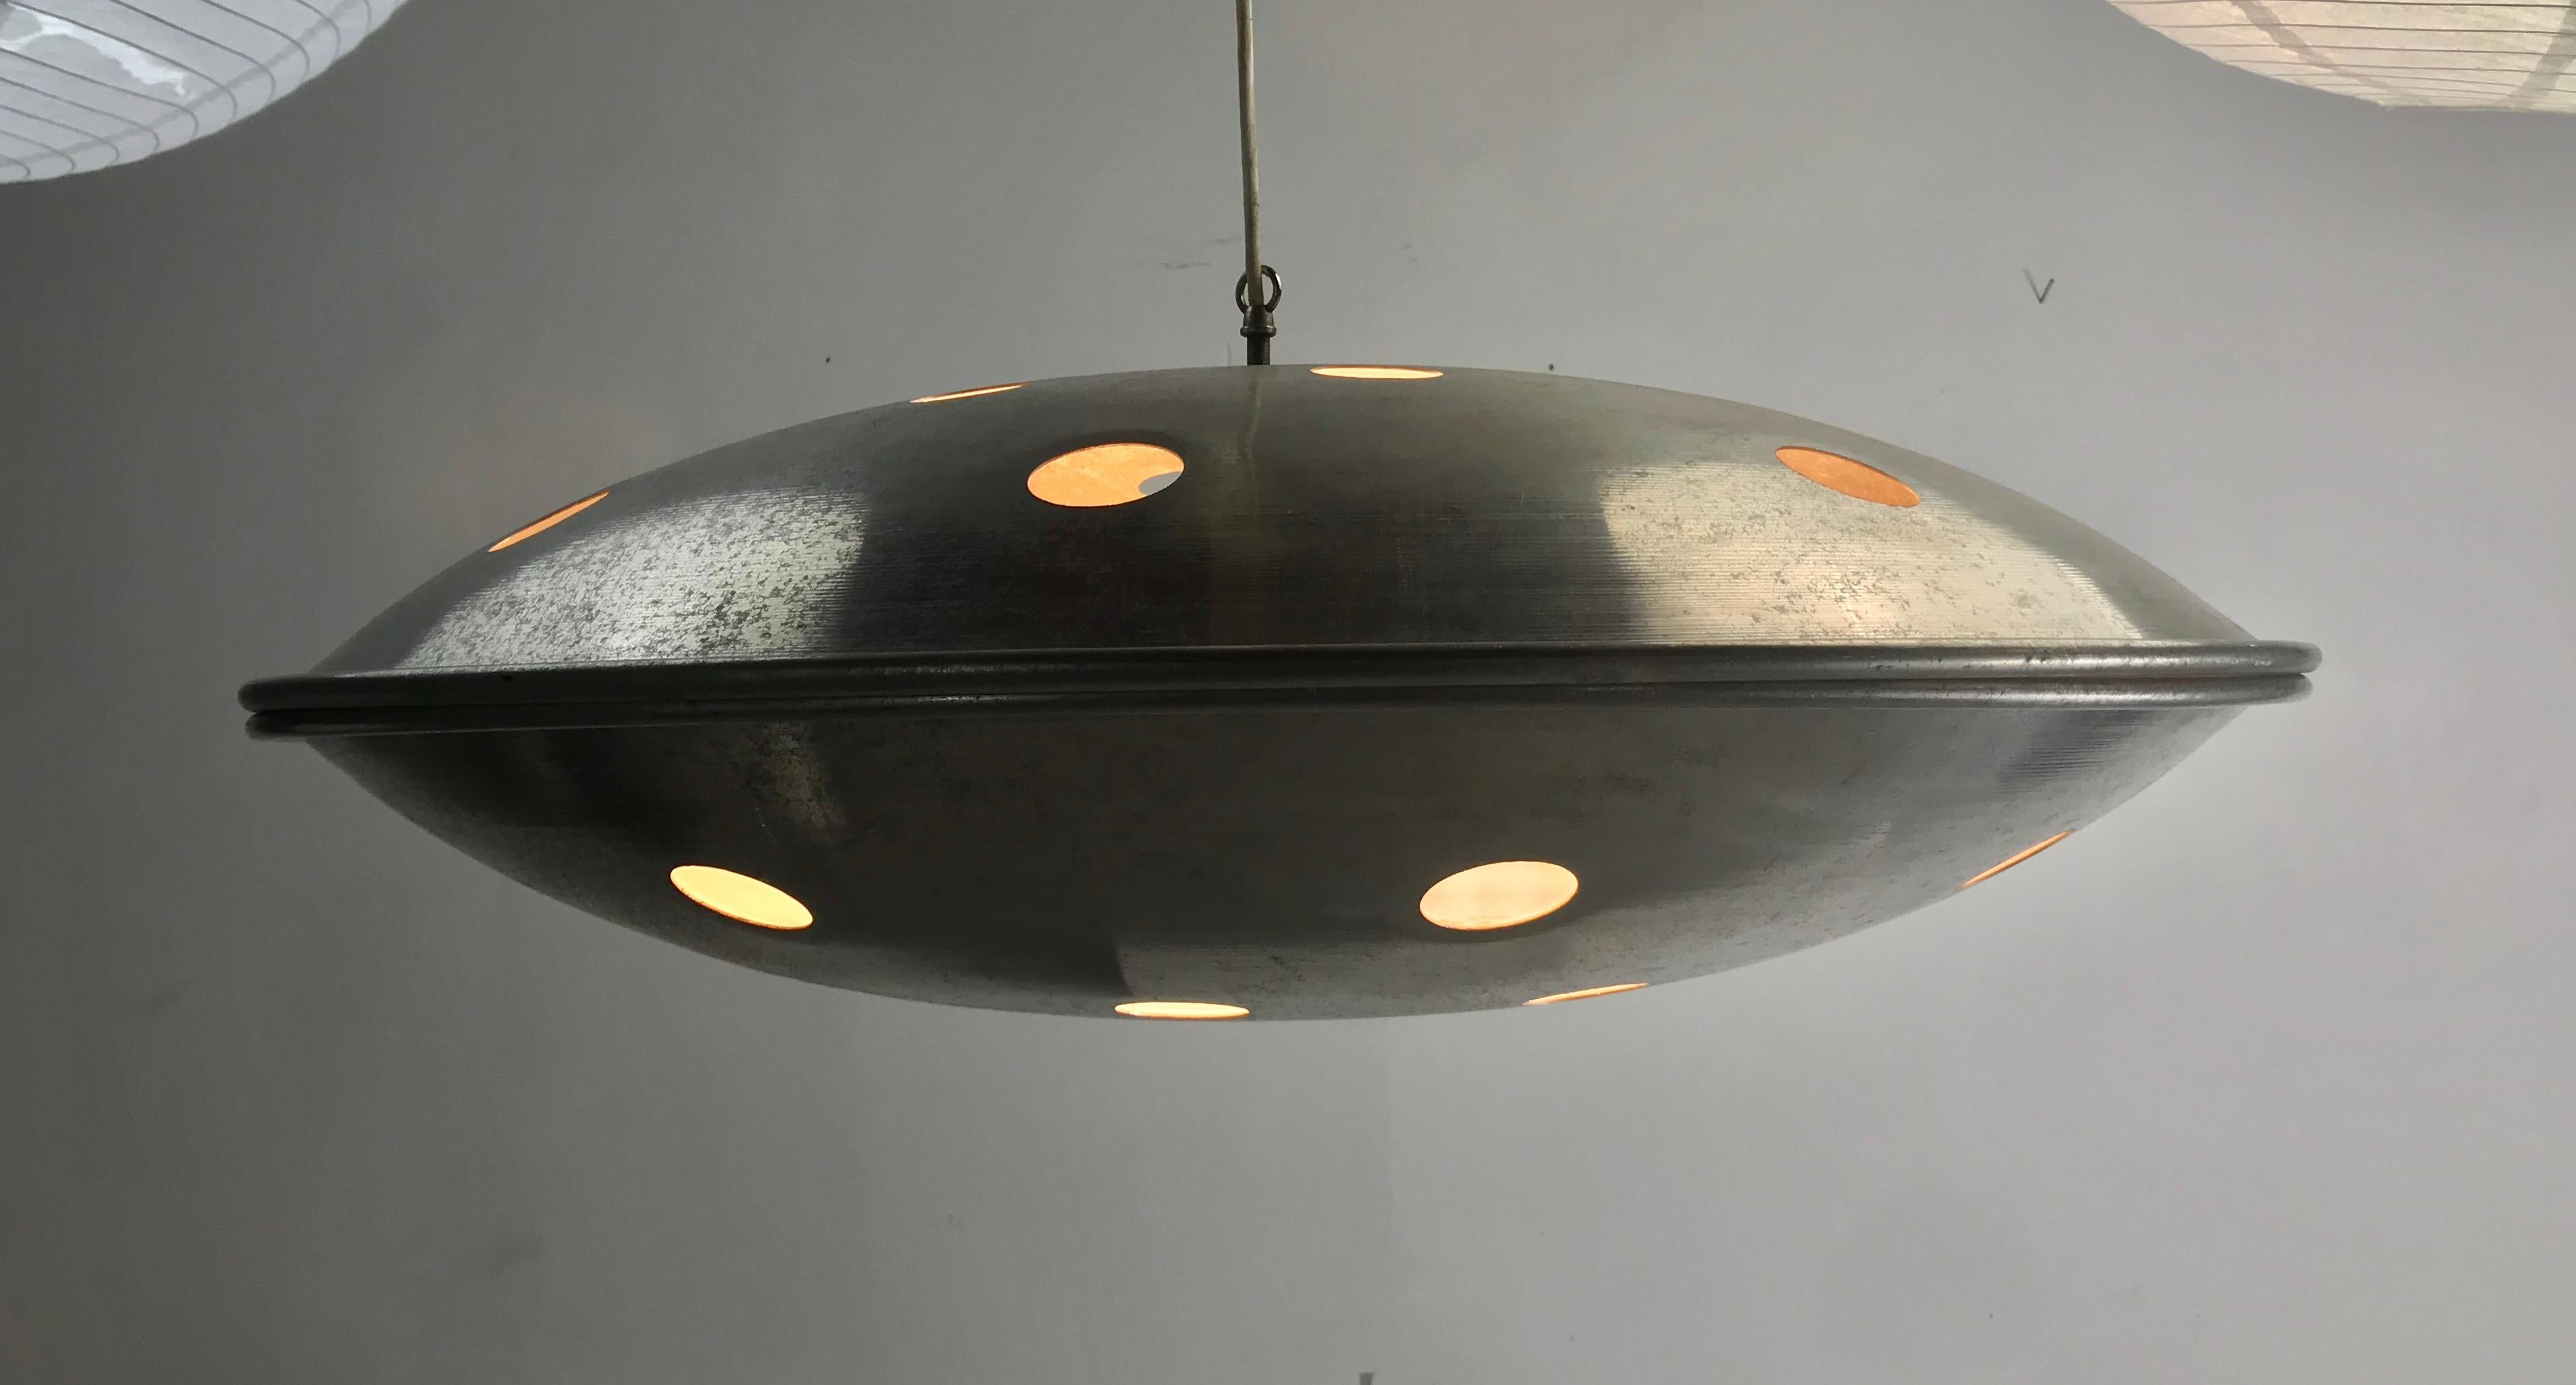 Modernist 1960s Space Age U F O flying saucer hanging pendant light fixture consisting of two spun aluminum concave disks, Space Age pop modern design while remaining elegant, Hanging sculpture, art, holes through the top disk create light beams,